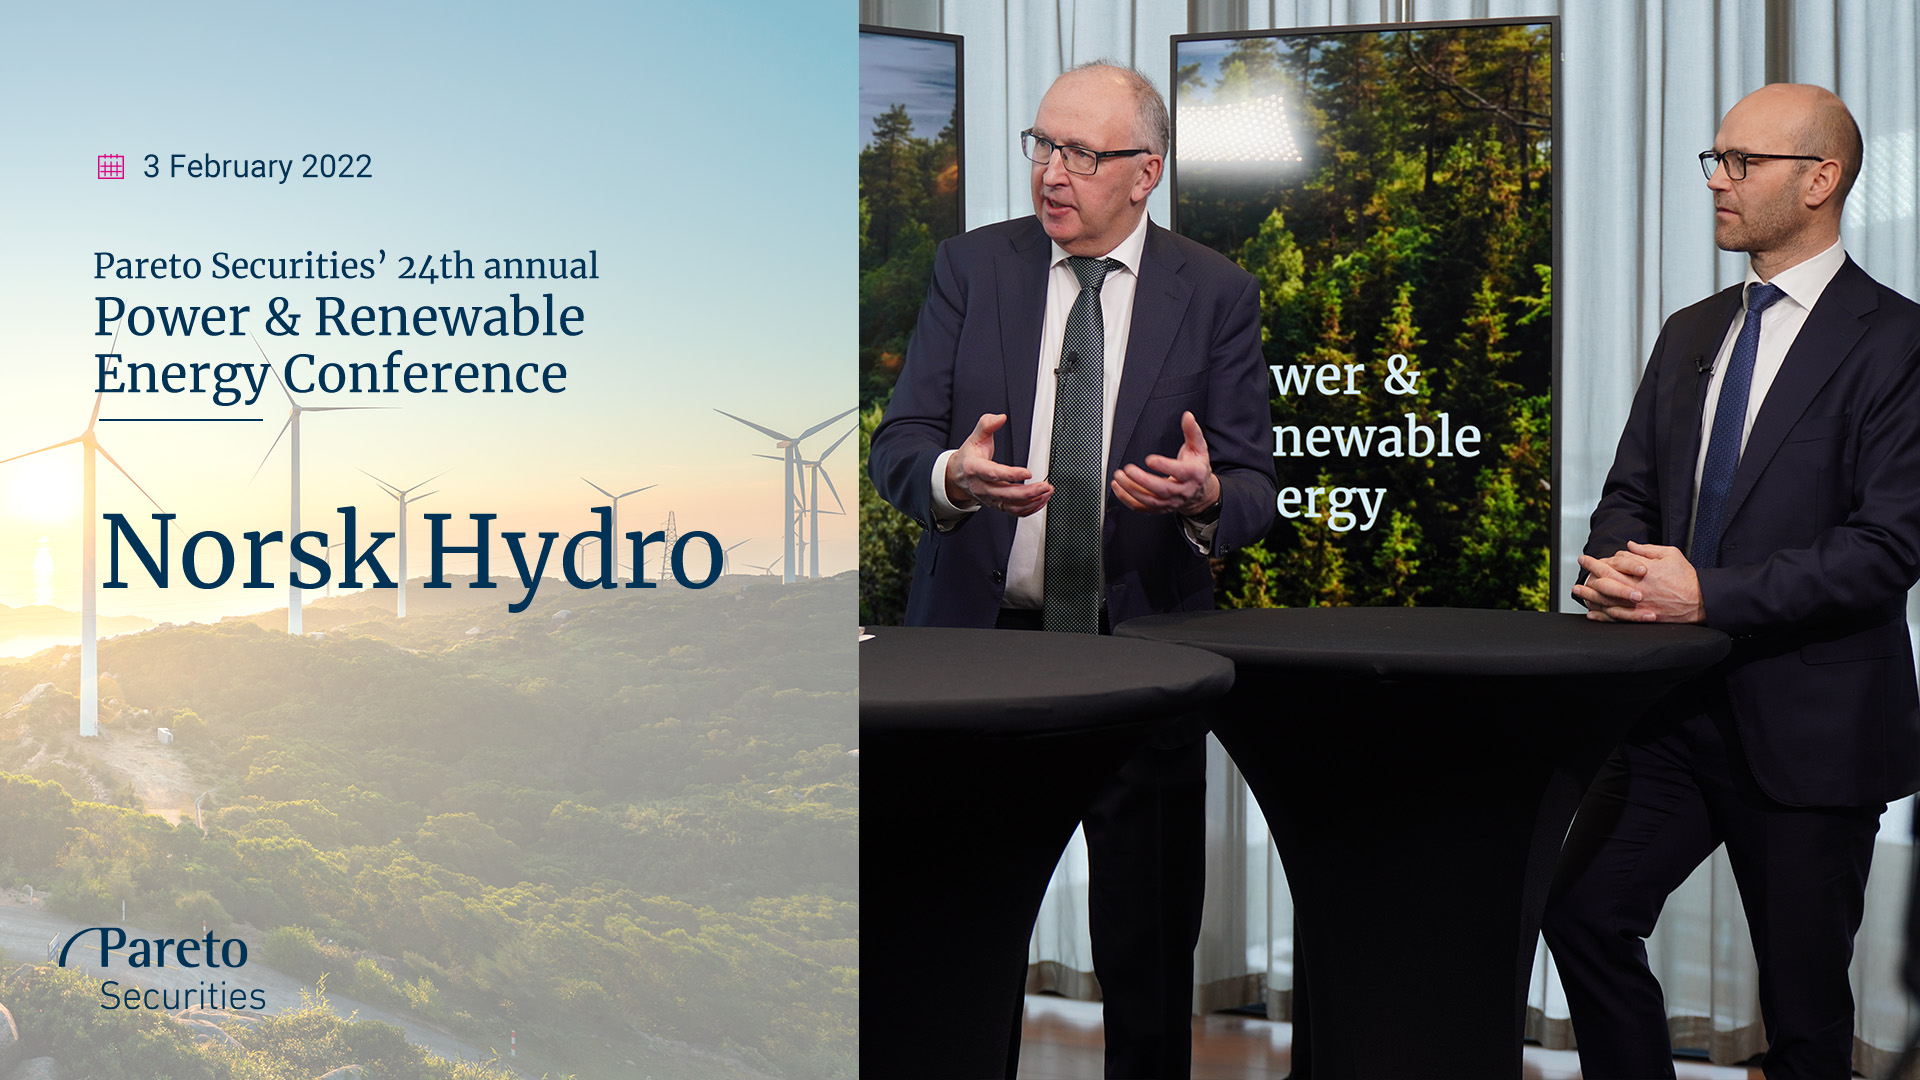 Norsk Hydro: Drive for decarbonisation / Pareto Securities' Power & Renewable Energy Conference 2022